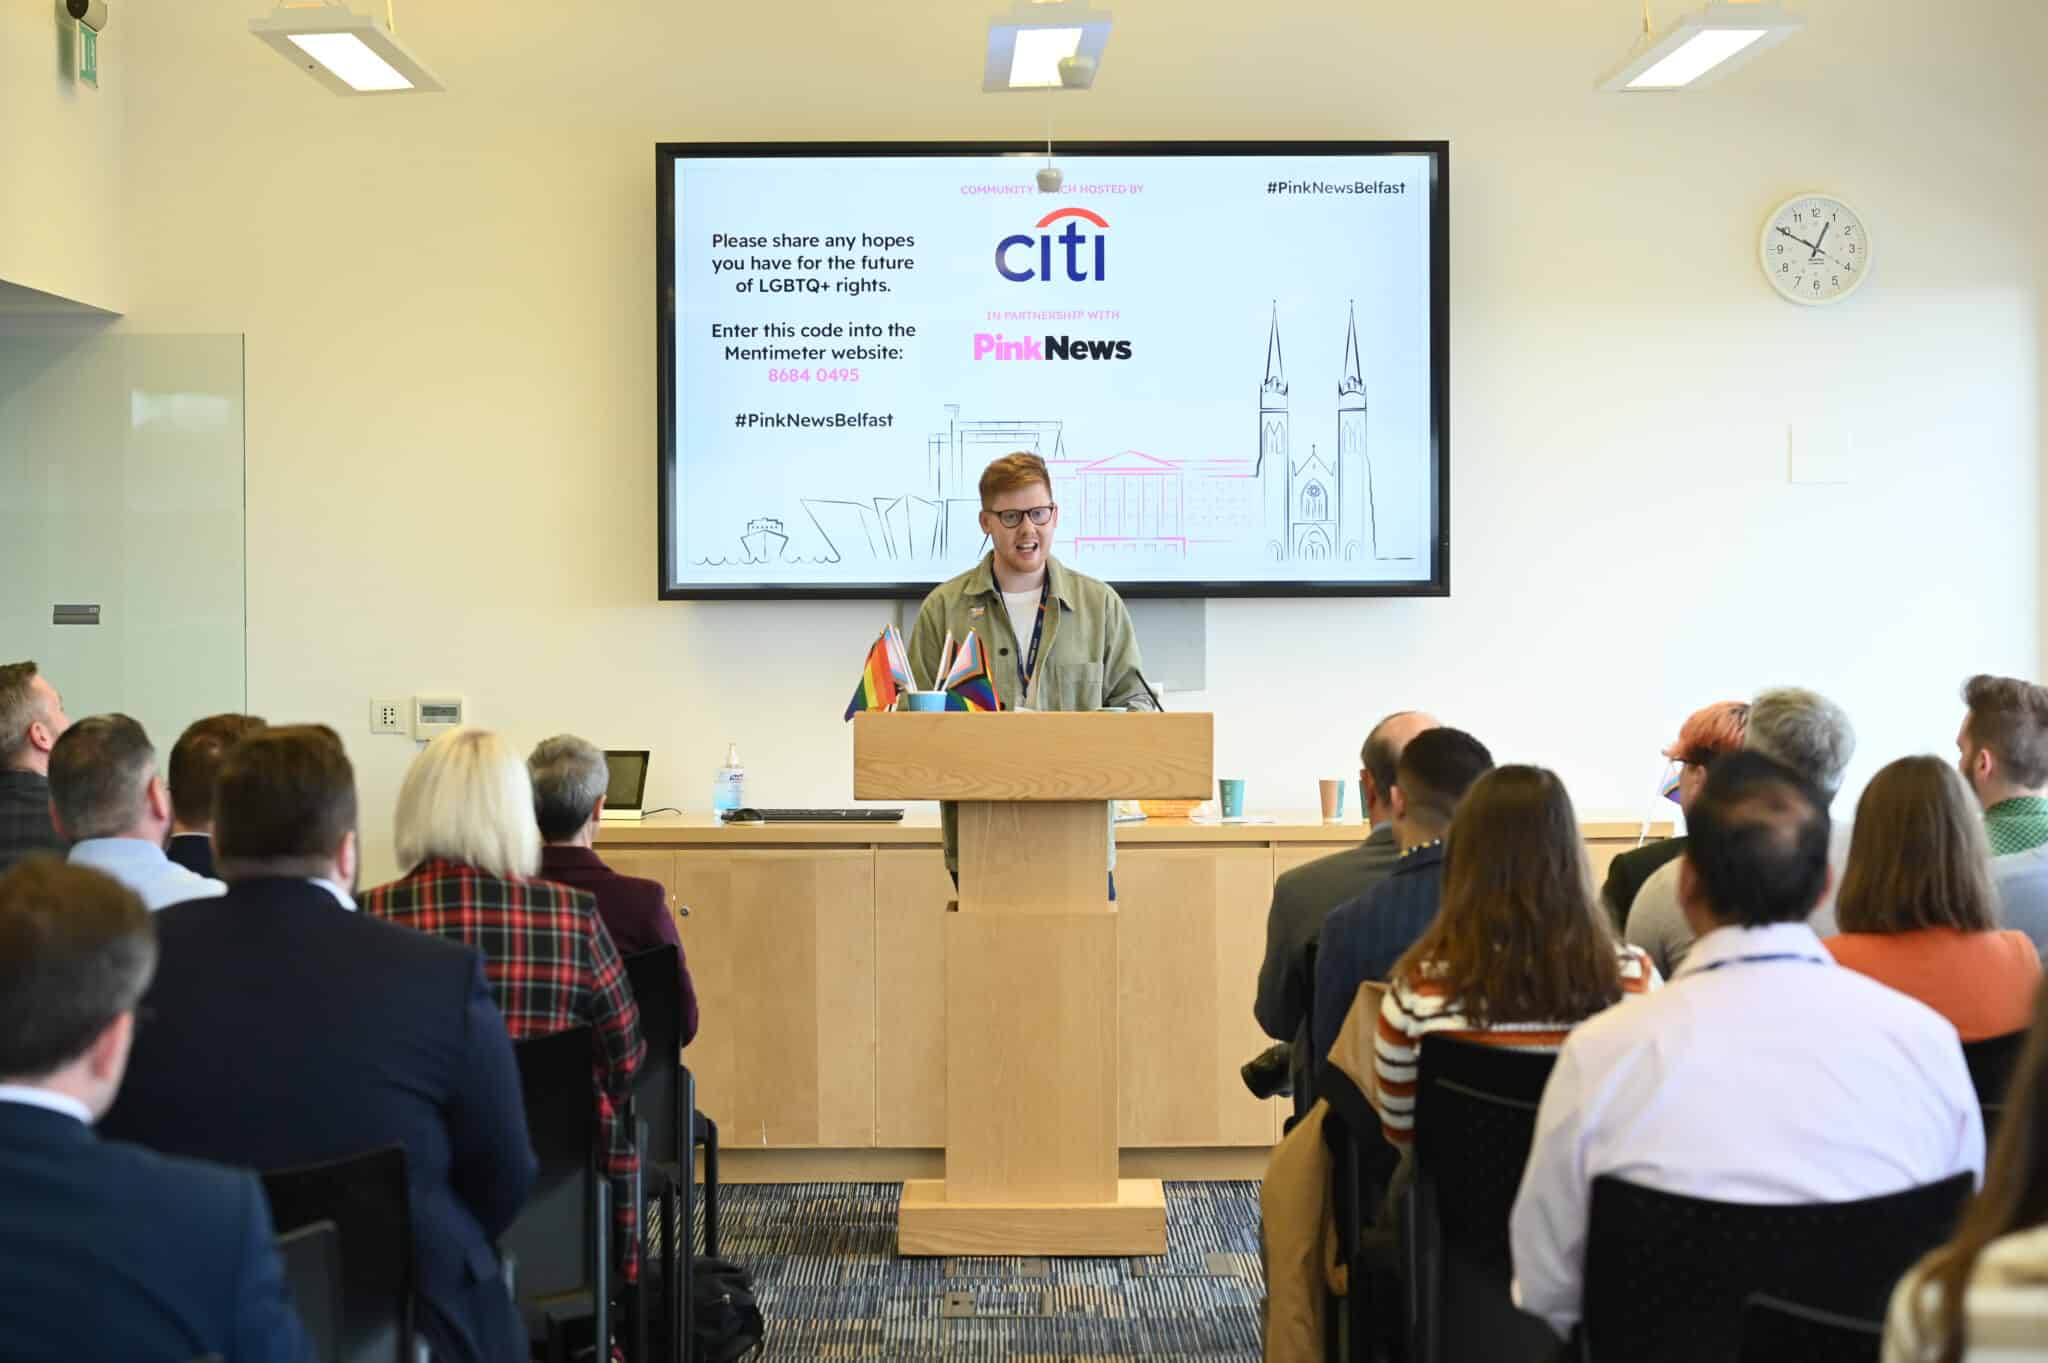 Odhrán Devlin of Citi speaking at a community lunch hosted by Citi in partnership with PinkNews.